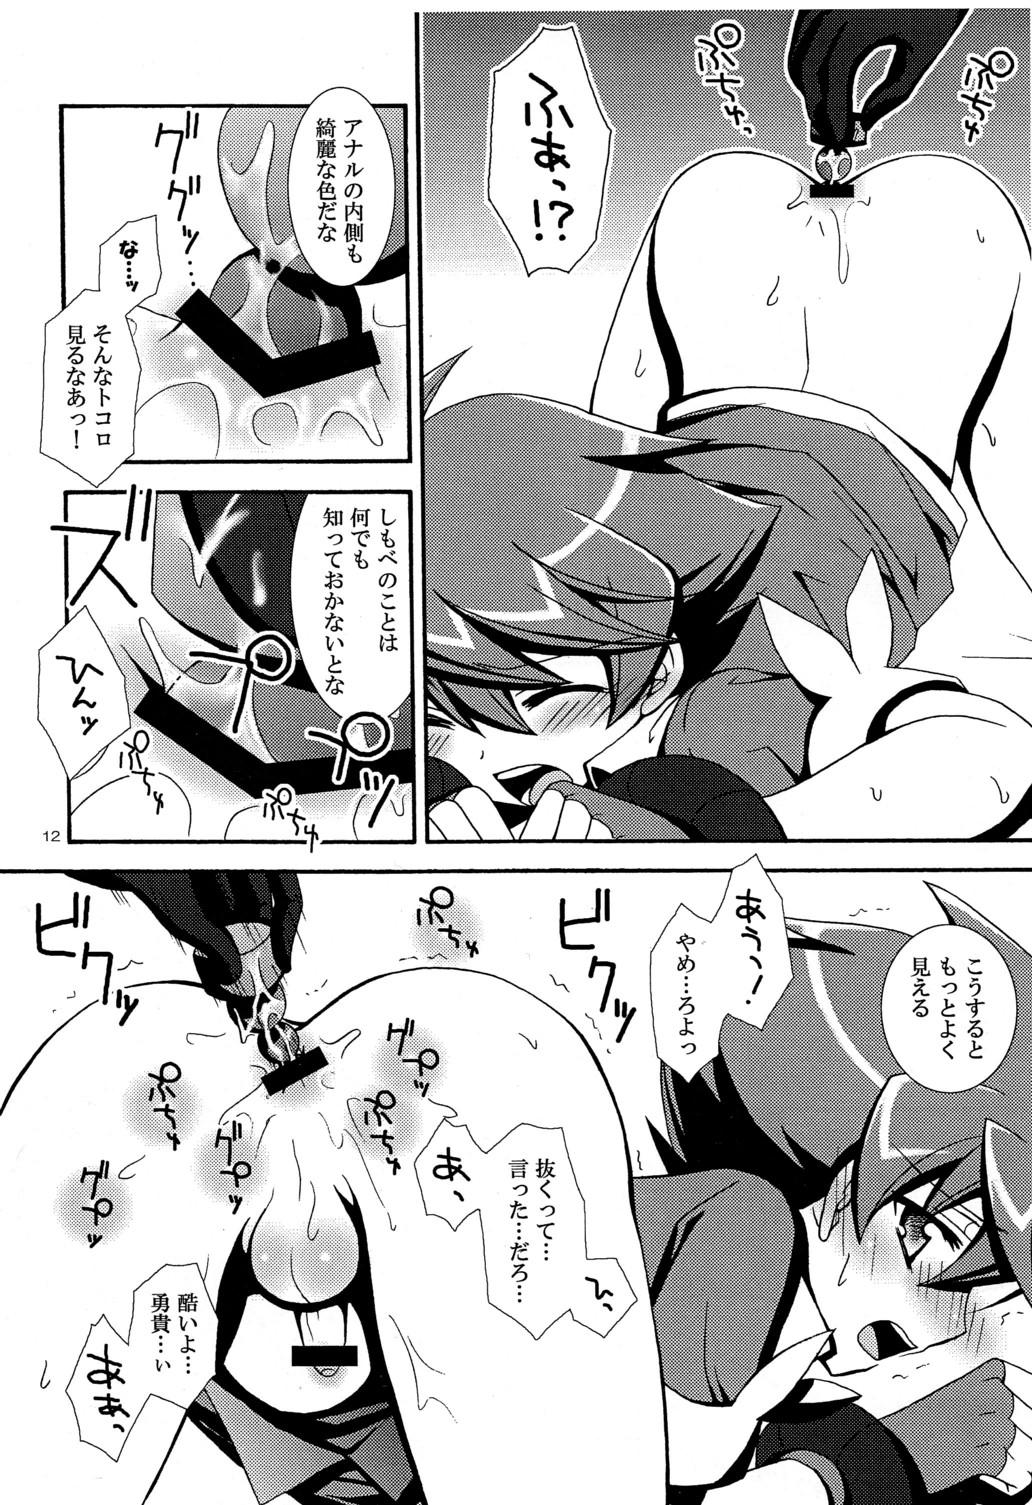 Exposed Ore no Shimobe - Battle spirits Lingerie - Page 12